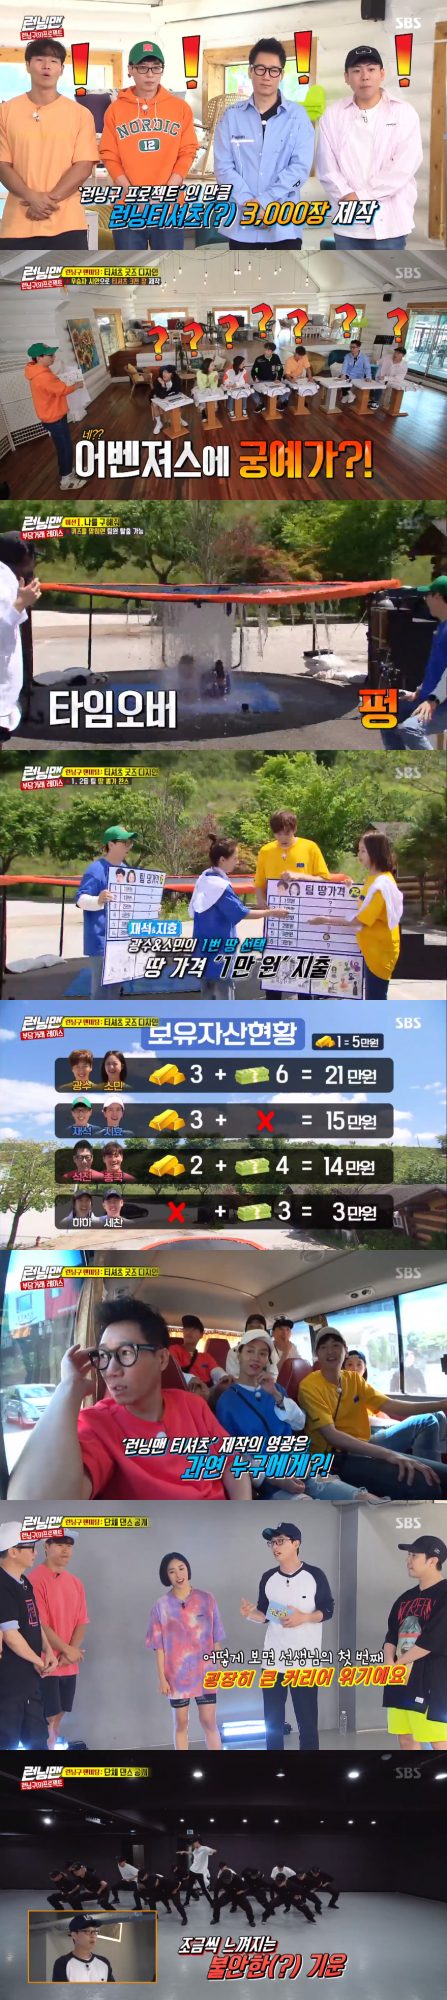 On SBS Running Man, members ran a race with a fan meeting Goods T-shirt design.On the 2nd broadcast Running Man, the third story of Running Gu Project for a fan meeting to celebrate the 9th anniversary, Running Man Goods Production Race, was held.Former members of Race painted the design of the T-shirt they wanted to produce when they won each.Yoo Jae-Suk drew a laugh by drawing Juveniles, Ji Suk-jin drew Ji Sulok, and Kim Jong-kook drew Jikso as a concept.In particular, Kim Jong-kook missed Yang Se-chan among his members in his paintings.The members threw dice to obtain the commission fee and shared the team.Yoo Jae-suk, Song Ji-hyo, Jeon So-min and Lee Kwang-soo, Haha and Yang Se-chan, Ji Suk-jin and Kim Jong-kook, Haha and Yang Se-chan became teams, respectively, and they were assigned to Save Me, which was awarded gold and lunch rights.One person is a game that takes a quiz within the time limit, the other is a game that performs a penalty that is watered if the person who solves the quiz is wrong.Yoo Jae-Suk and Song Ji-hyo, Haha and Yang Se-chan won first and second in the game.Haha and Yang Se-chan failed to take the gold bullion from Jeon So-min and Lee Kwang-soo, but Yoo Jae-Suk and Song Ji-hyo took one of them.At the end of the broadcast, choreography to be shown at a fan meeting was released. The production team has been preparing choreography at the request of members to make it feel like Celeb Fives Celeb Five.The choreographer was Ria Kim, who choreographed the choreography of Stern s 24 hours short and Twice TT .Yoo Jae-Suk introduced choreographer Lia Kim and laughed, saying,  (What was choreographed by Running Man fan meeting) is the first crisis of your career in some ways.Ji Suk-jin, who watched the choreography video that the members should do at the fan meeting, worried that this is a world-class level.Yoo Jae-Suk also admired that it was cool even though I can not do this. Ria Kim explained, I matched the level of the celeb five in my own way.Next weeks broadcast continues with Race with Goods design.